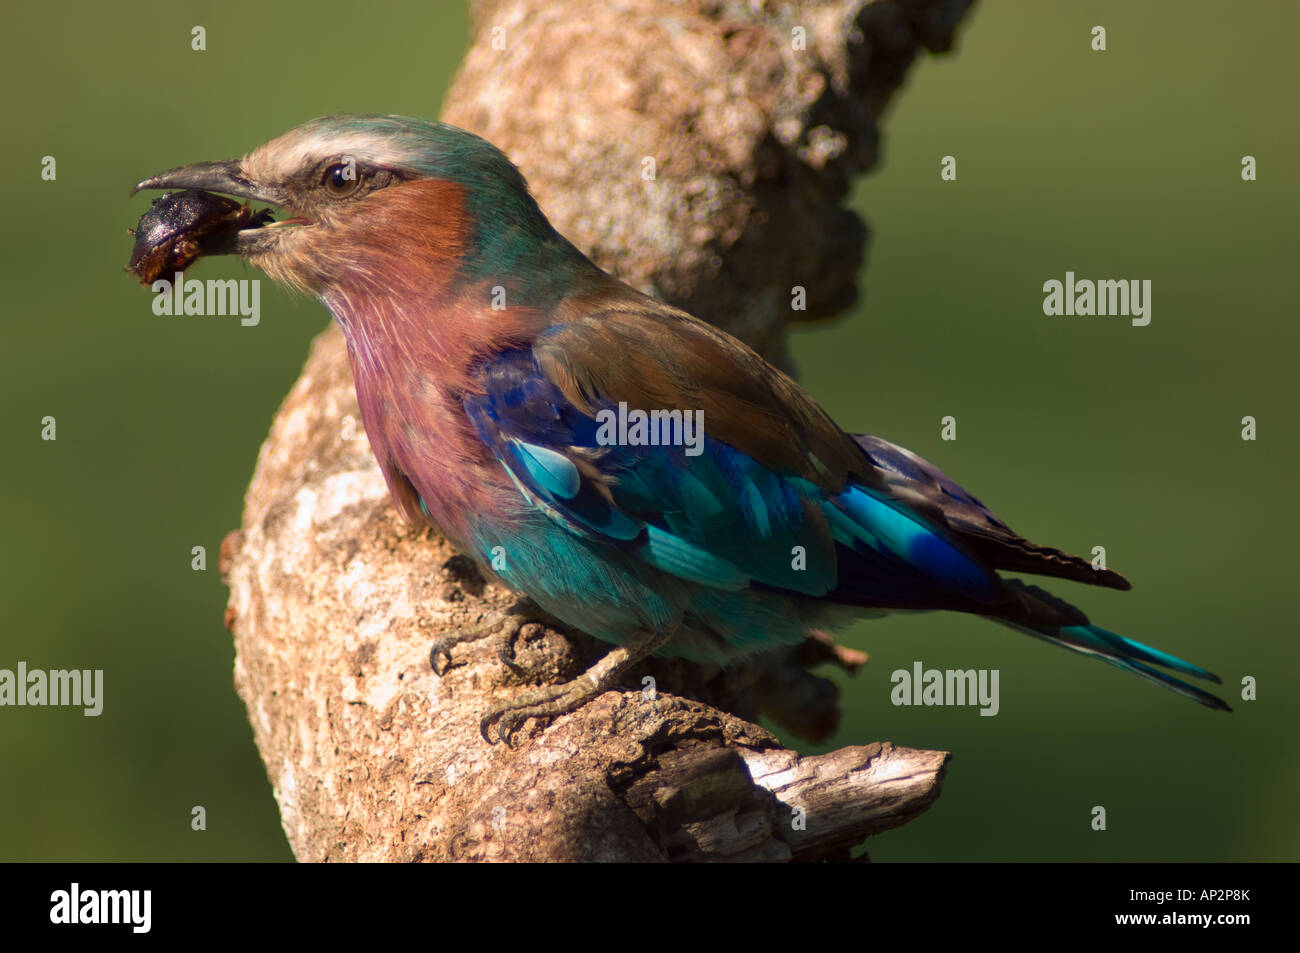 Lilac-breasted roller eating beetle Stock Photo - Alamy